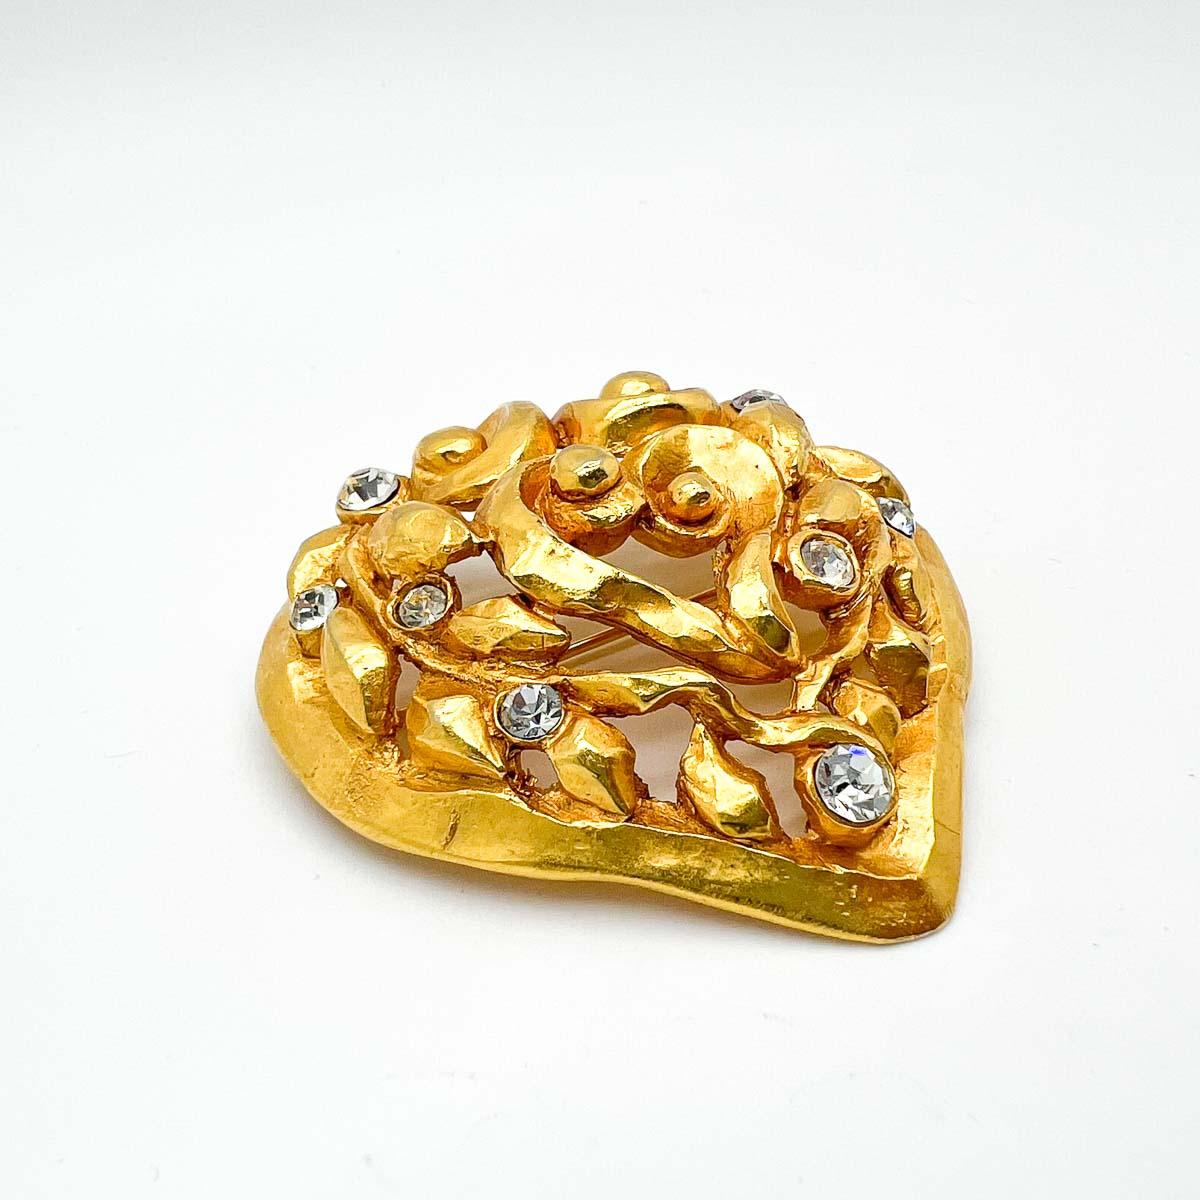 Women's Vintage Christian Lacroix Statement Heart Limited Edition 'Noel 1991' Brooch For Sale